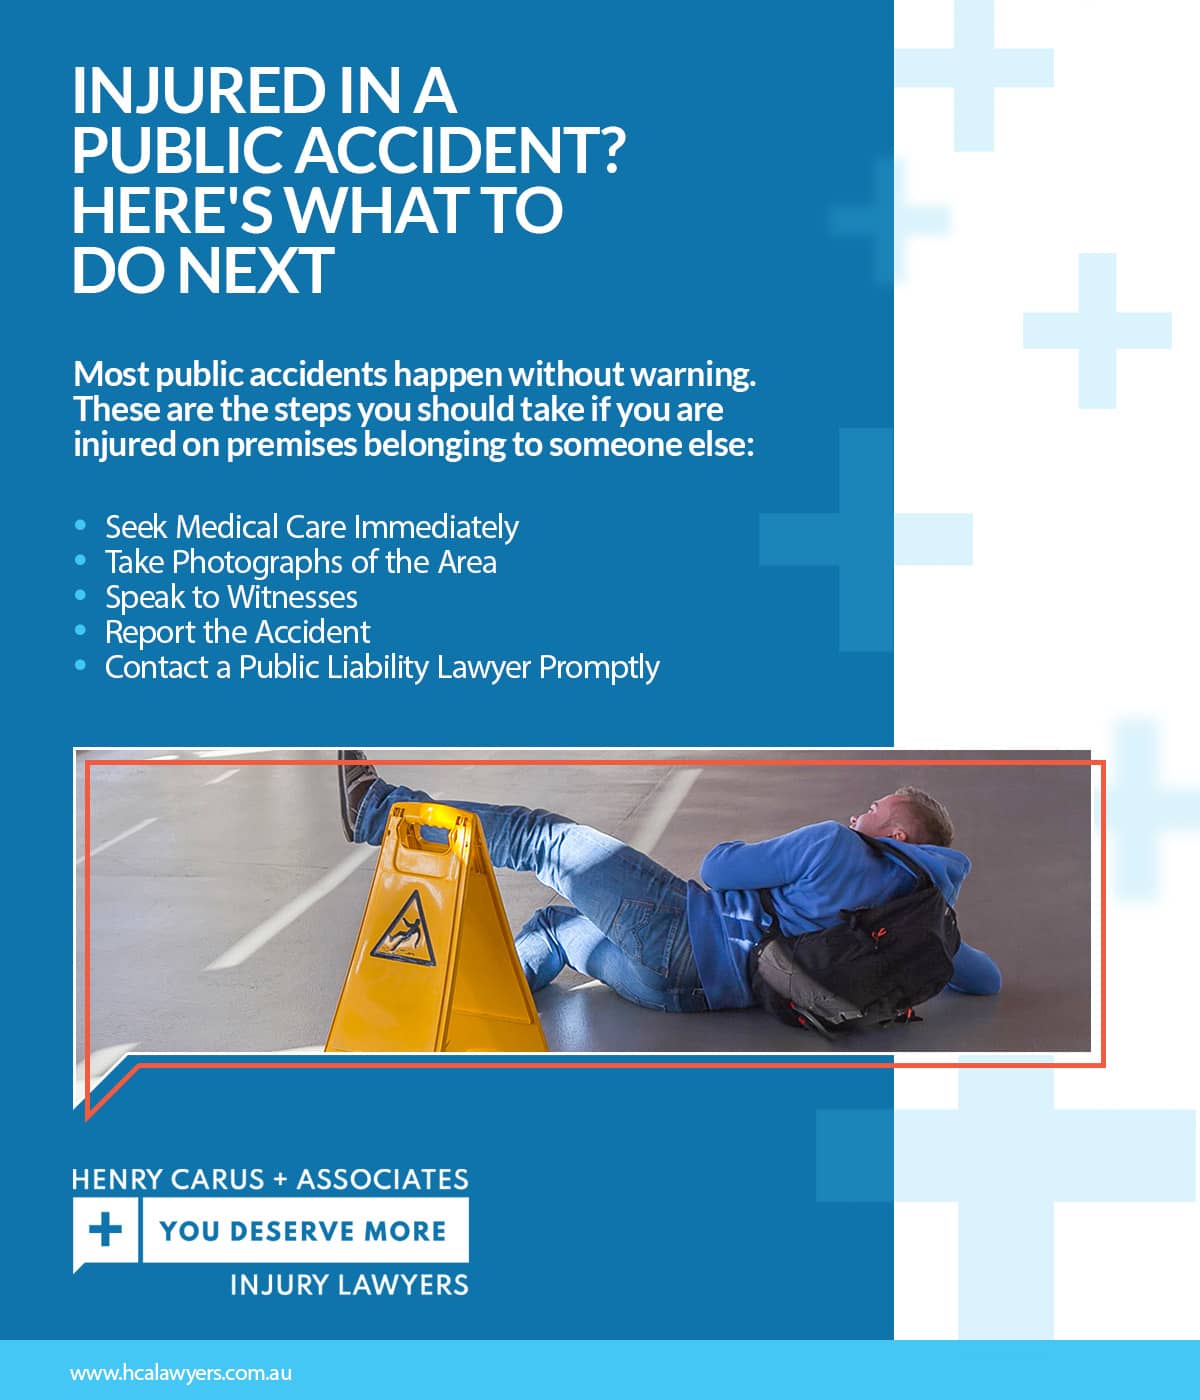 Injured in a public accident? Here's what to do next